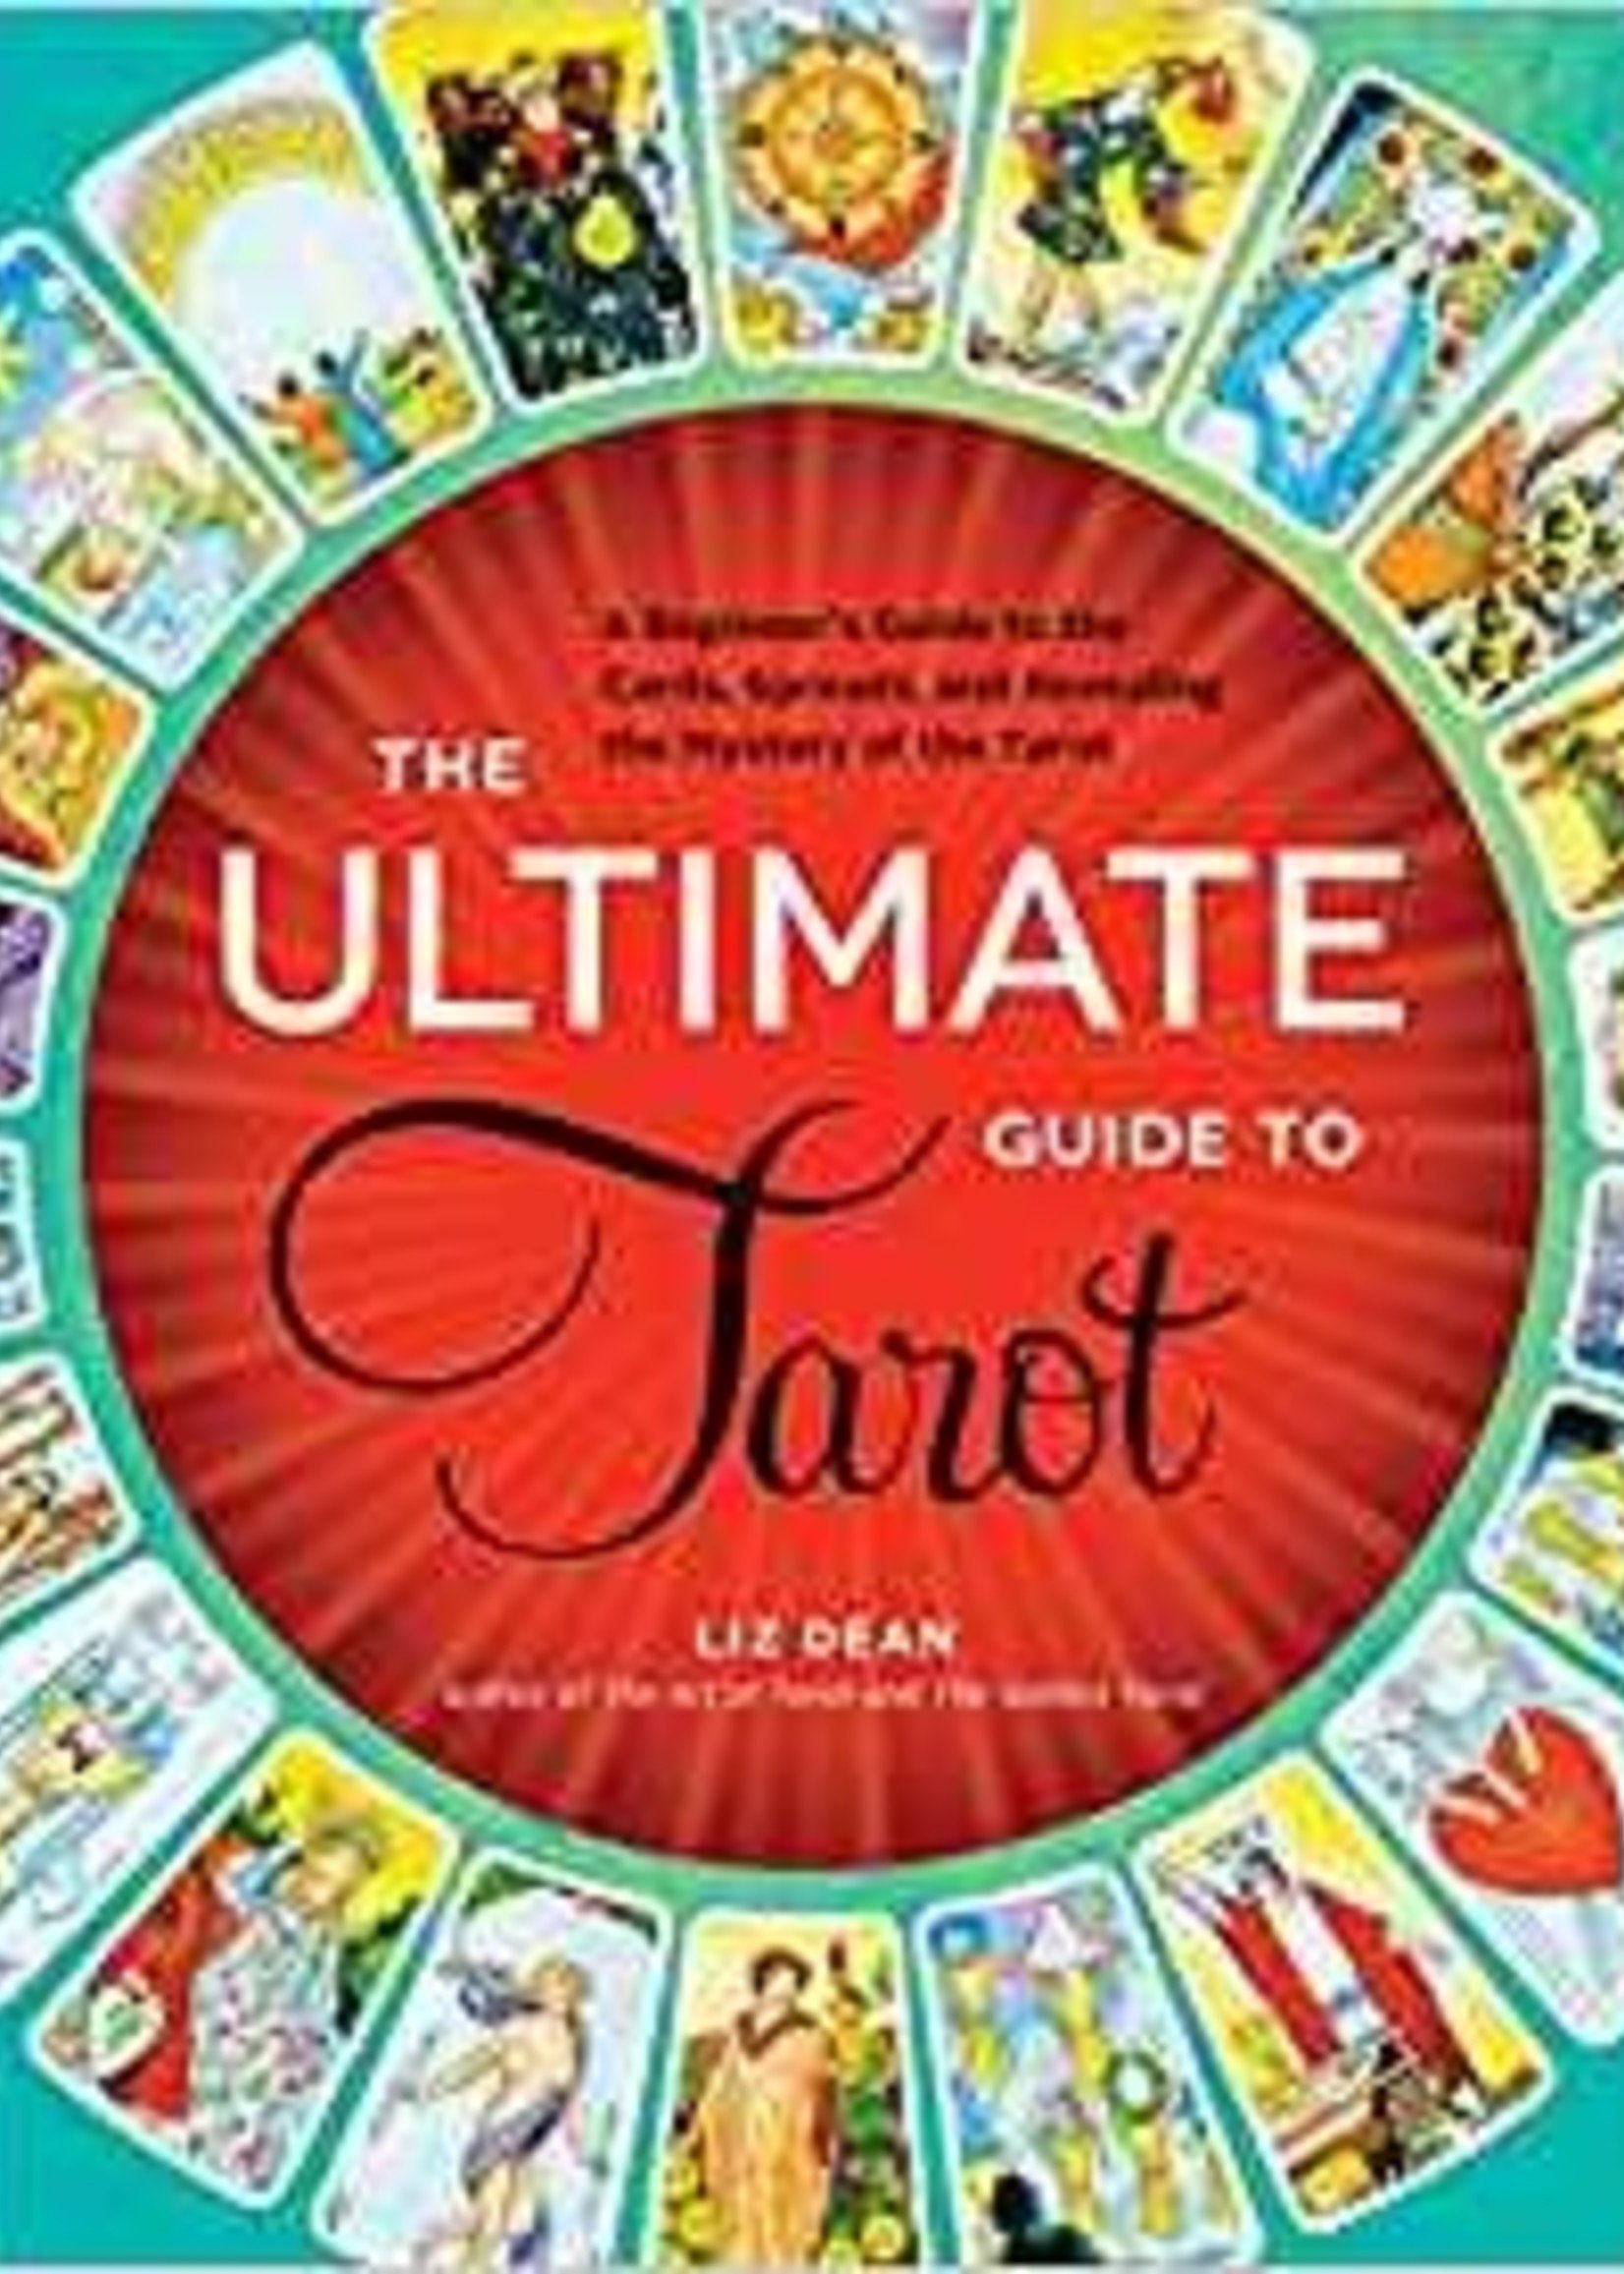 The Ultimate Guide to Tarot | A Beginner's Guide to the Cards, Spreads, and Revealing the Mystery of the Tarot